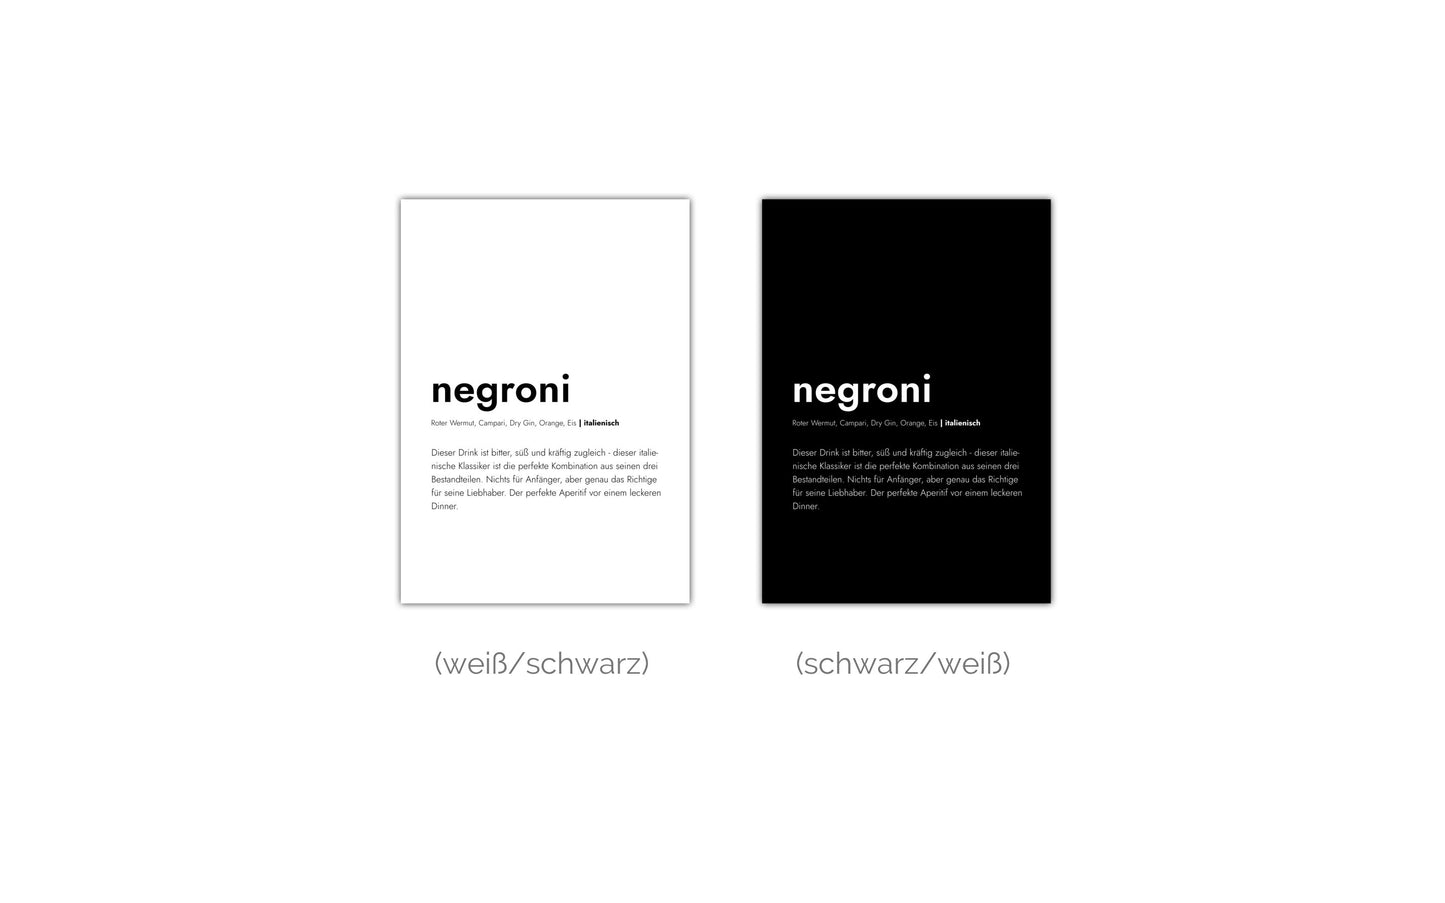 Poster Negroni - Definition